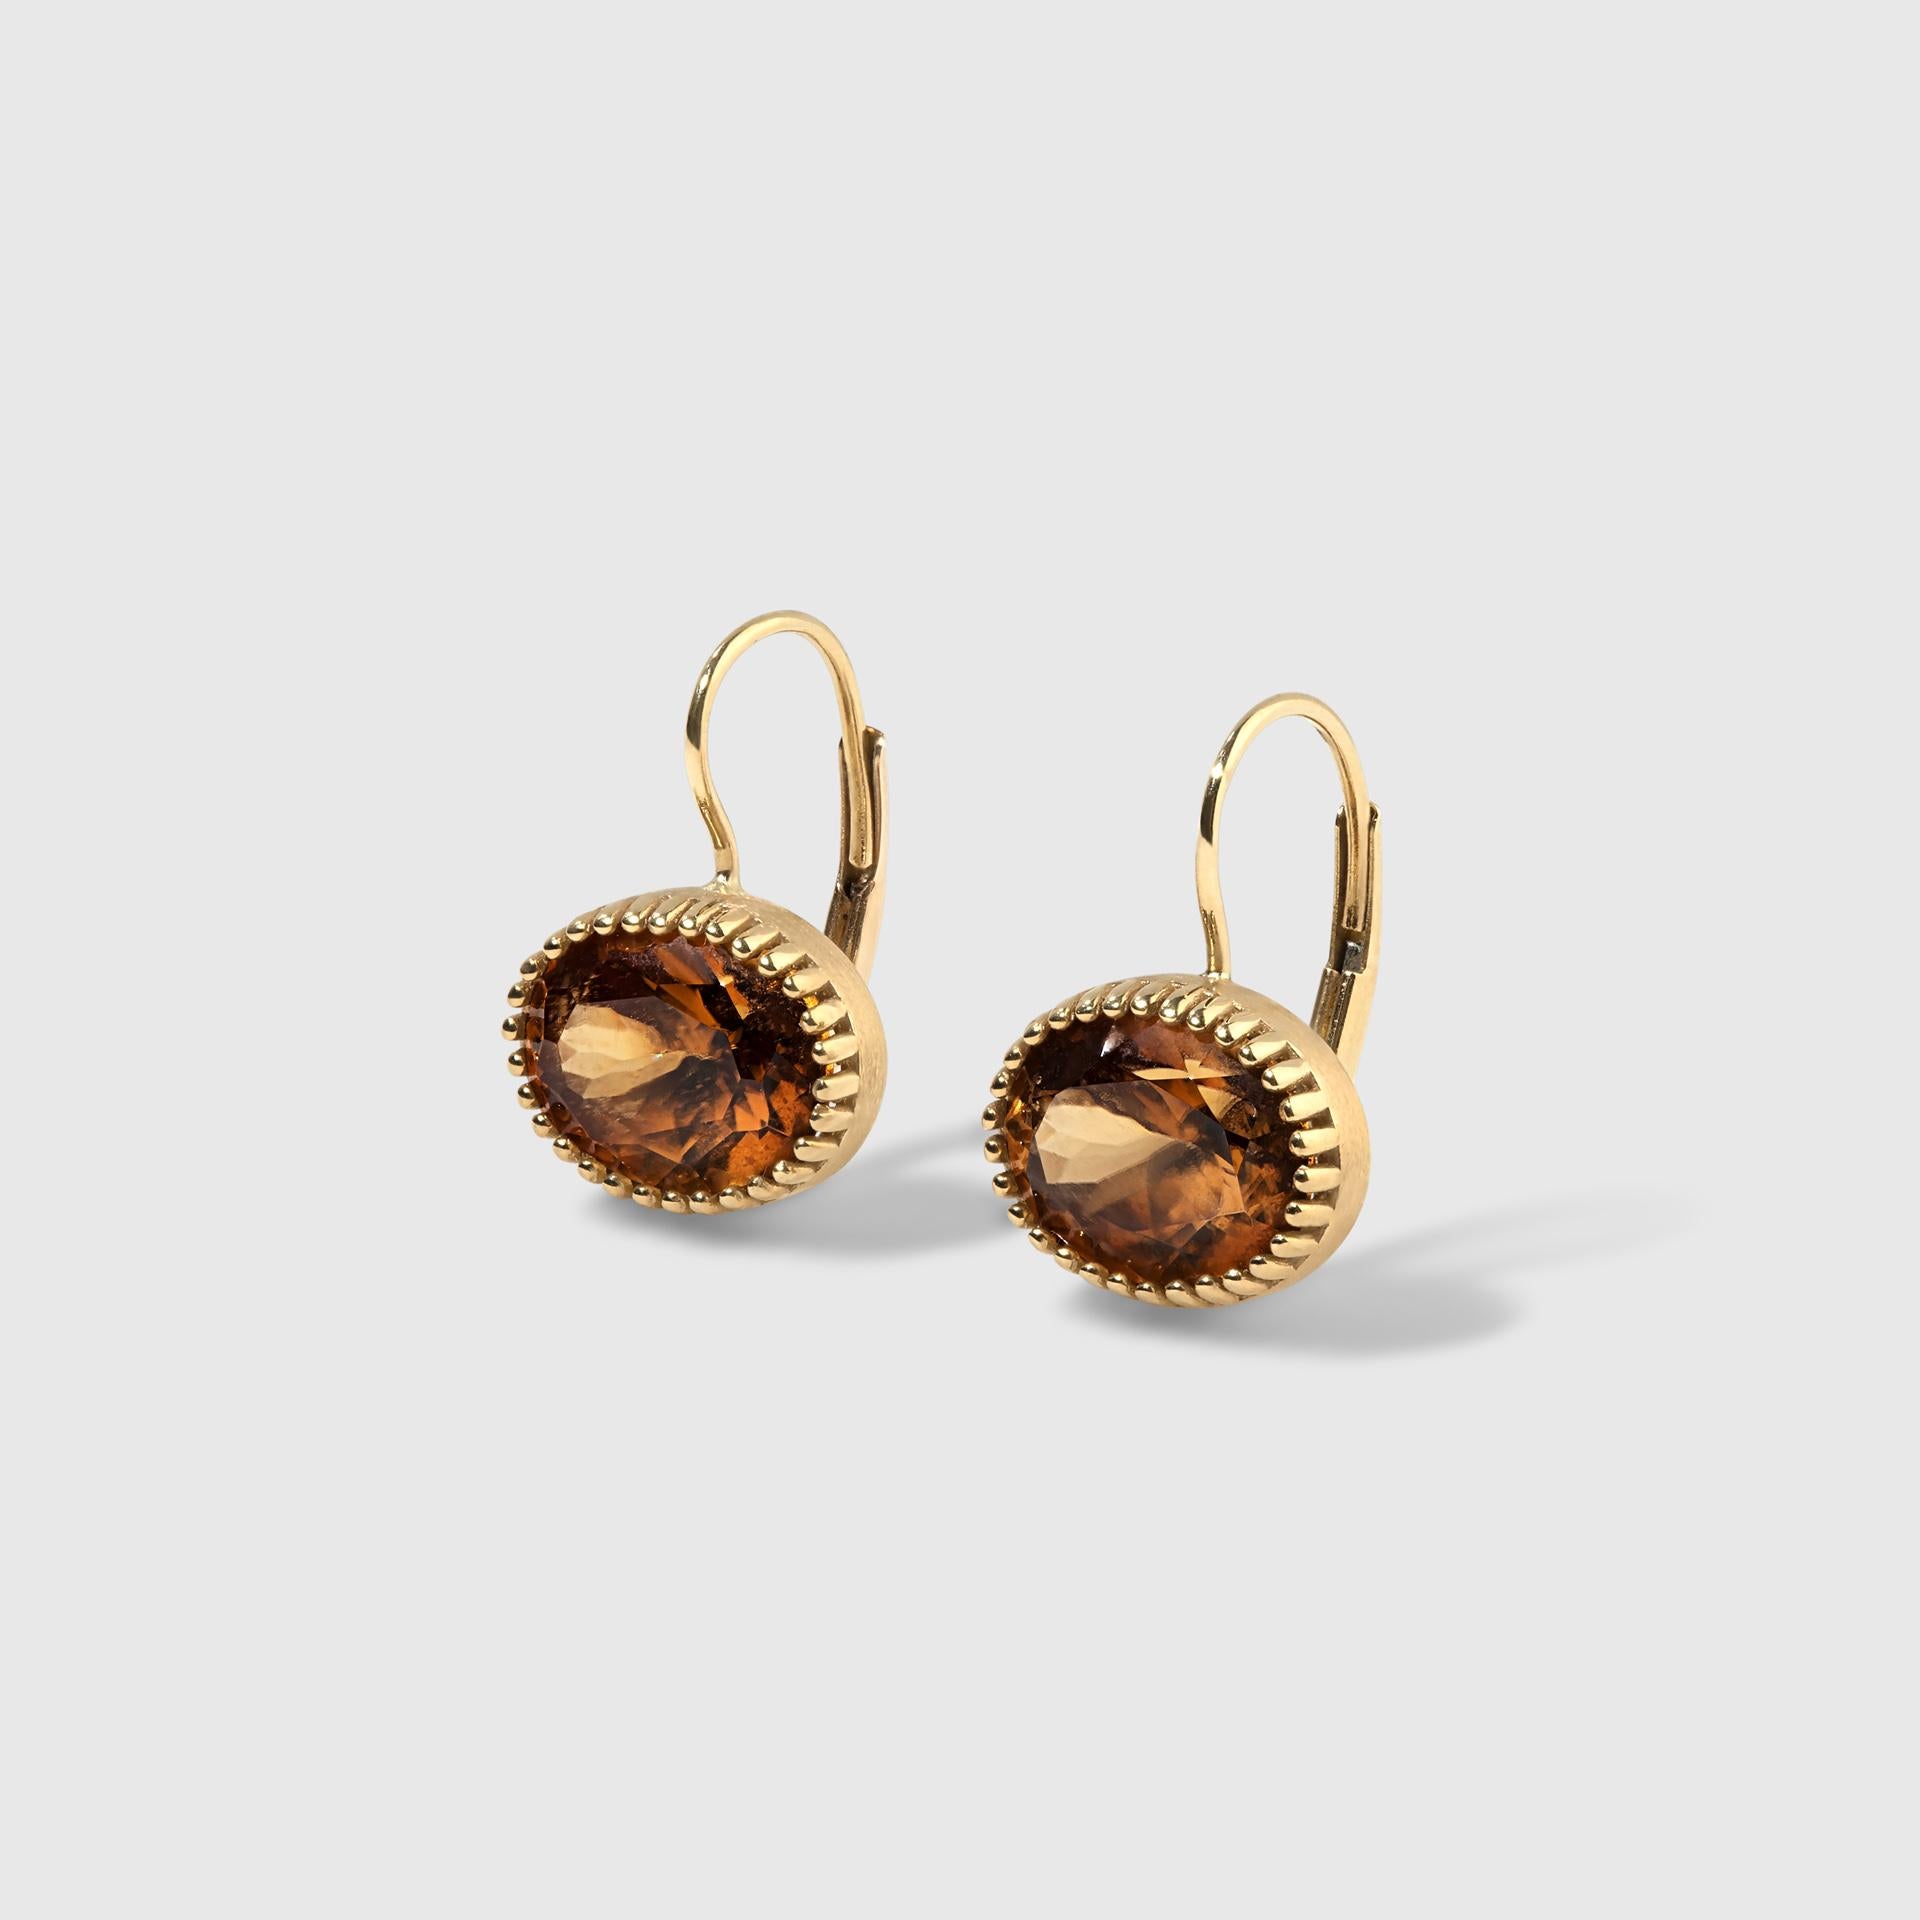 Women's or Men's Oval Cognac Zircon Earrings, 18kt Gold by Ashley Childs, Contemporary Jewelry For Sale